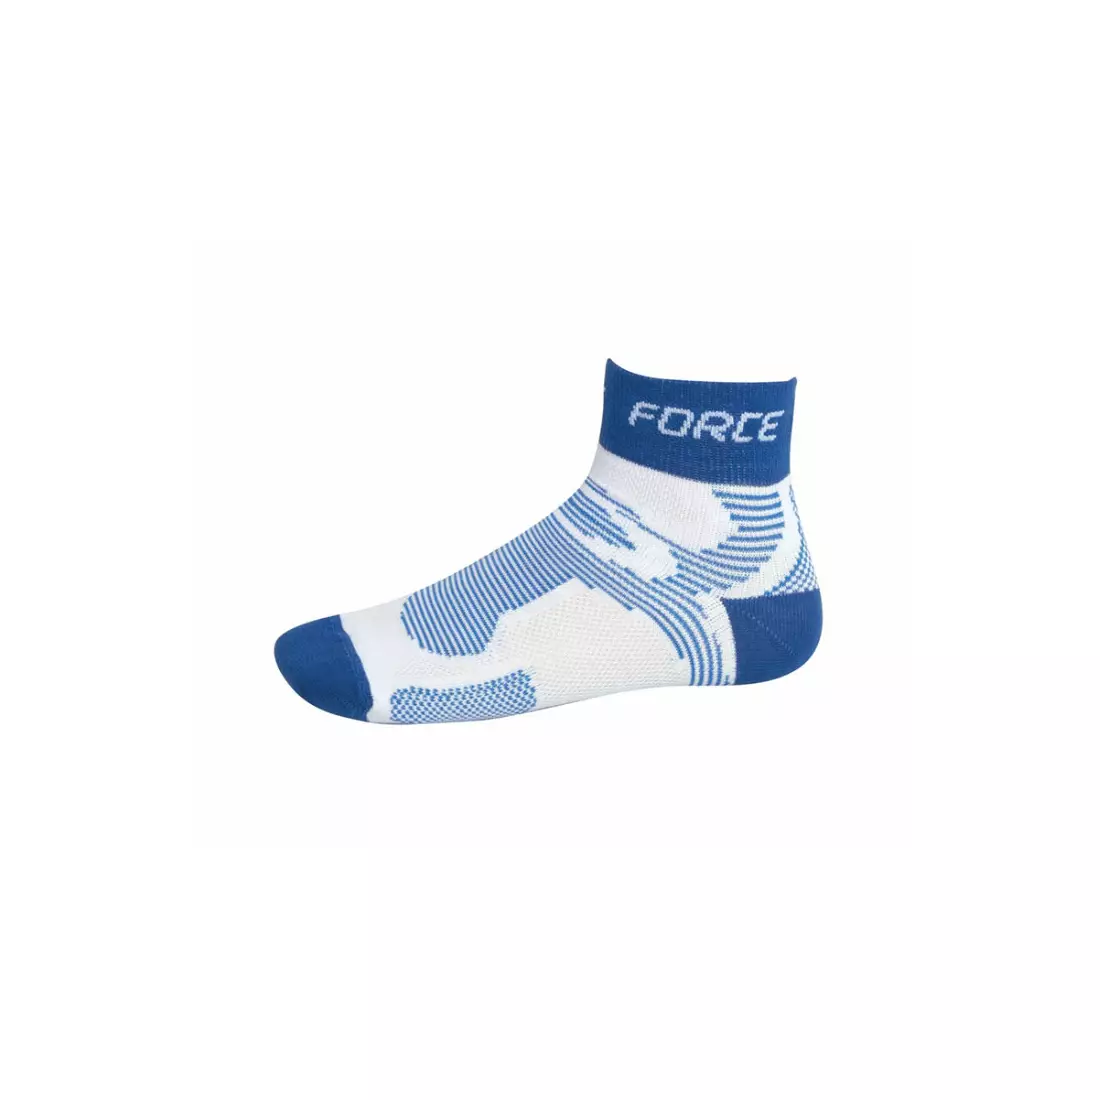 FORCE 2 COOLMAX sports socks 901021/901026 - white and blue